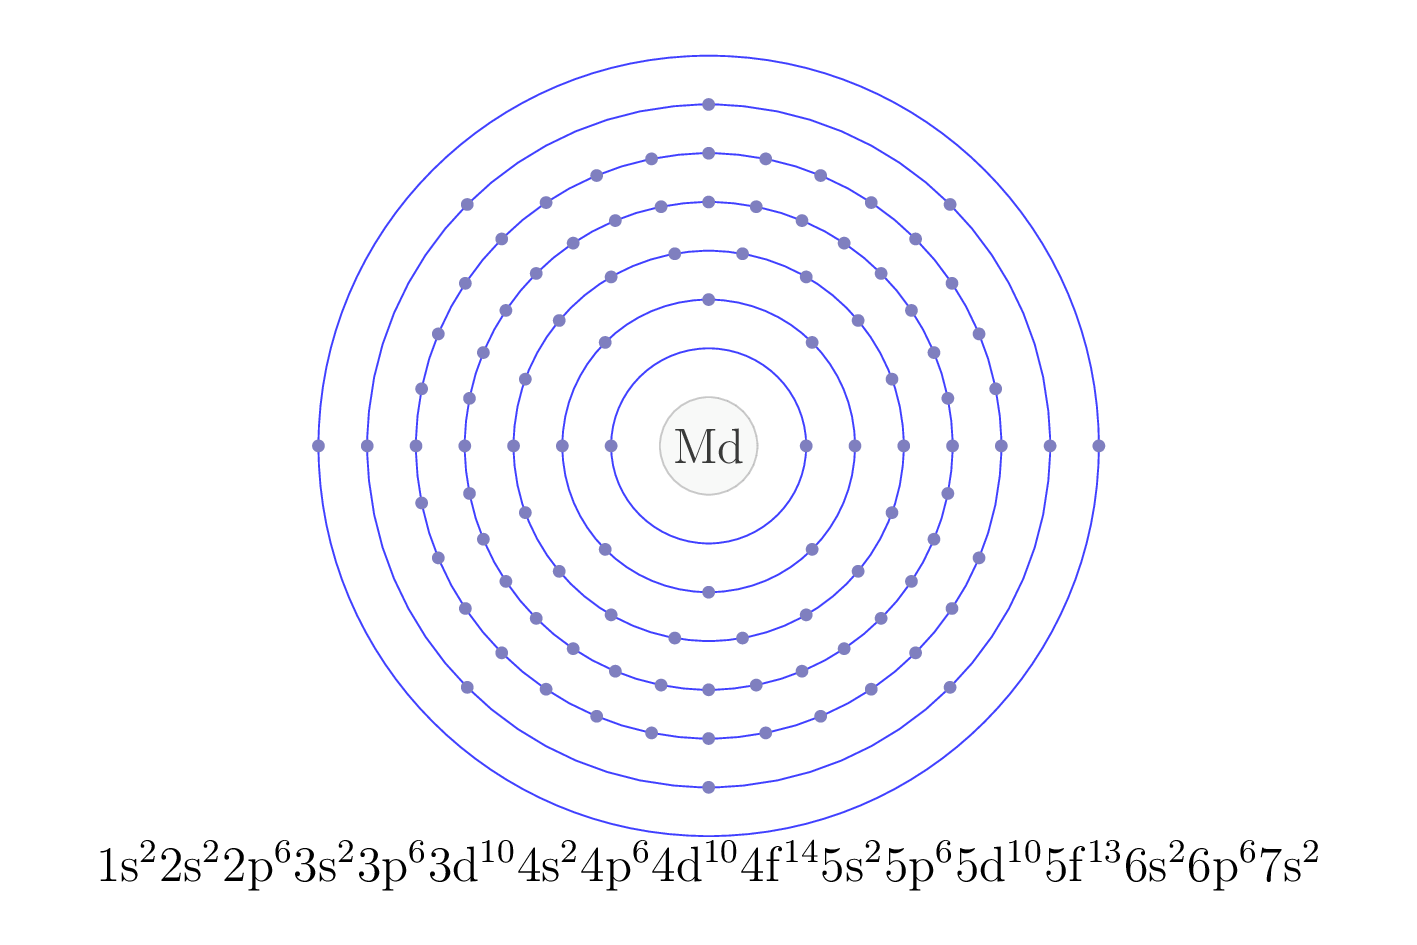 electron configuration of element Md